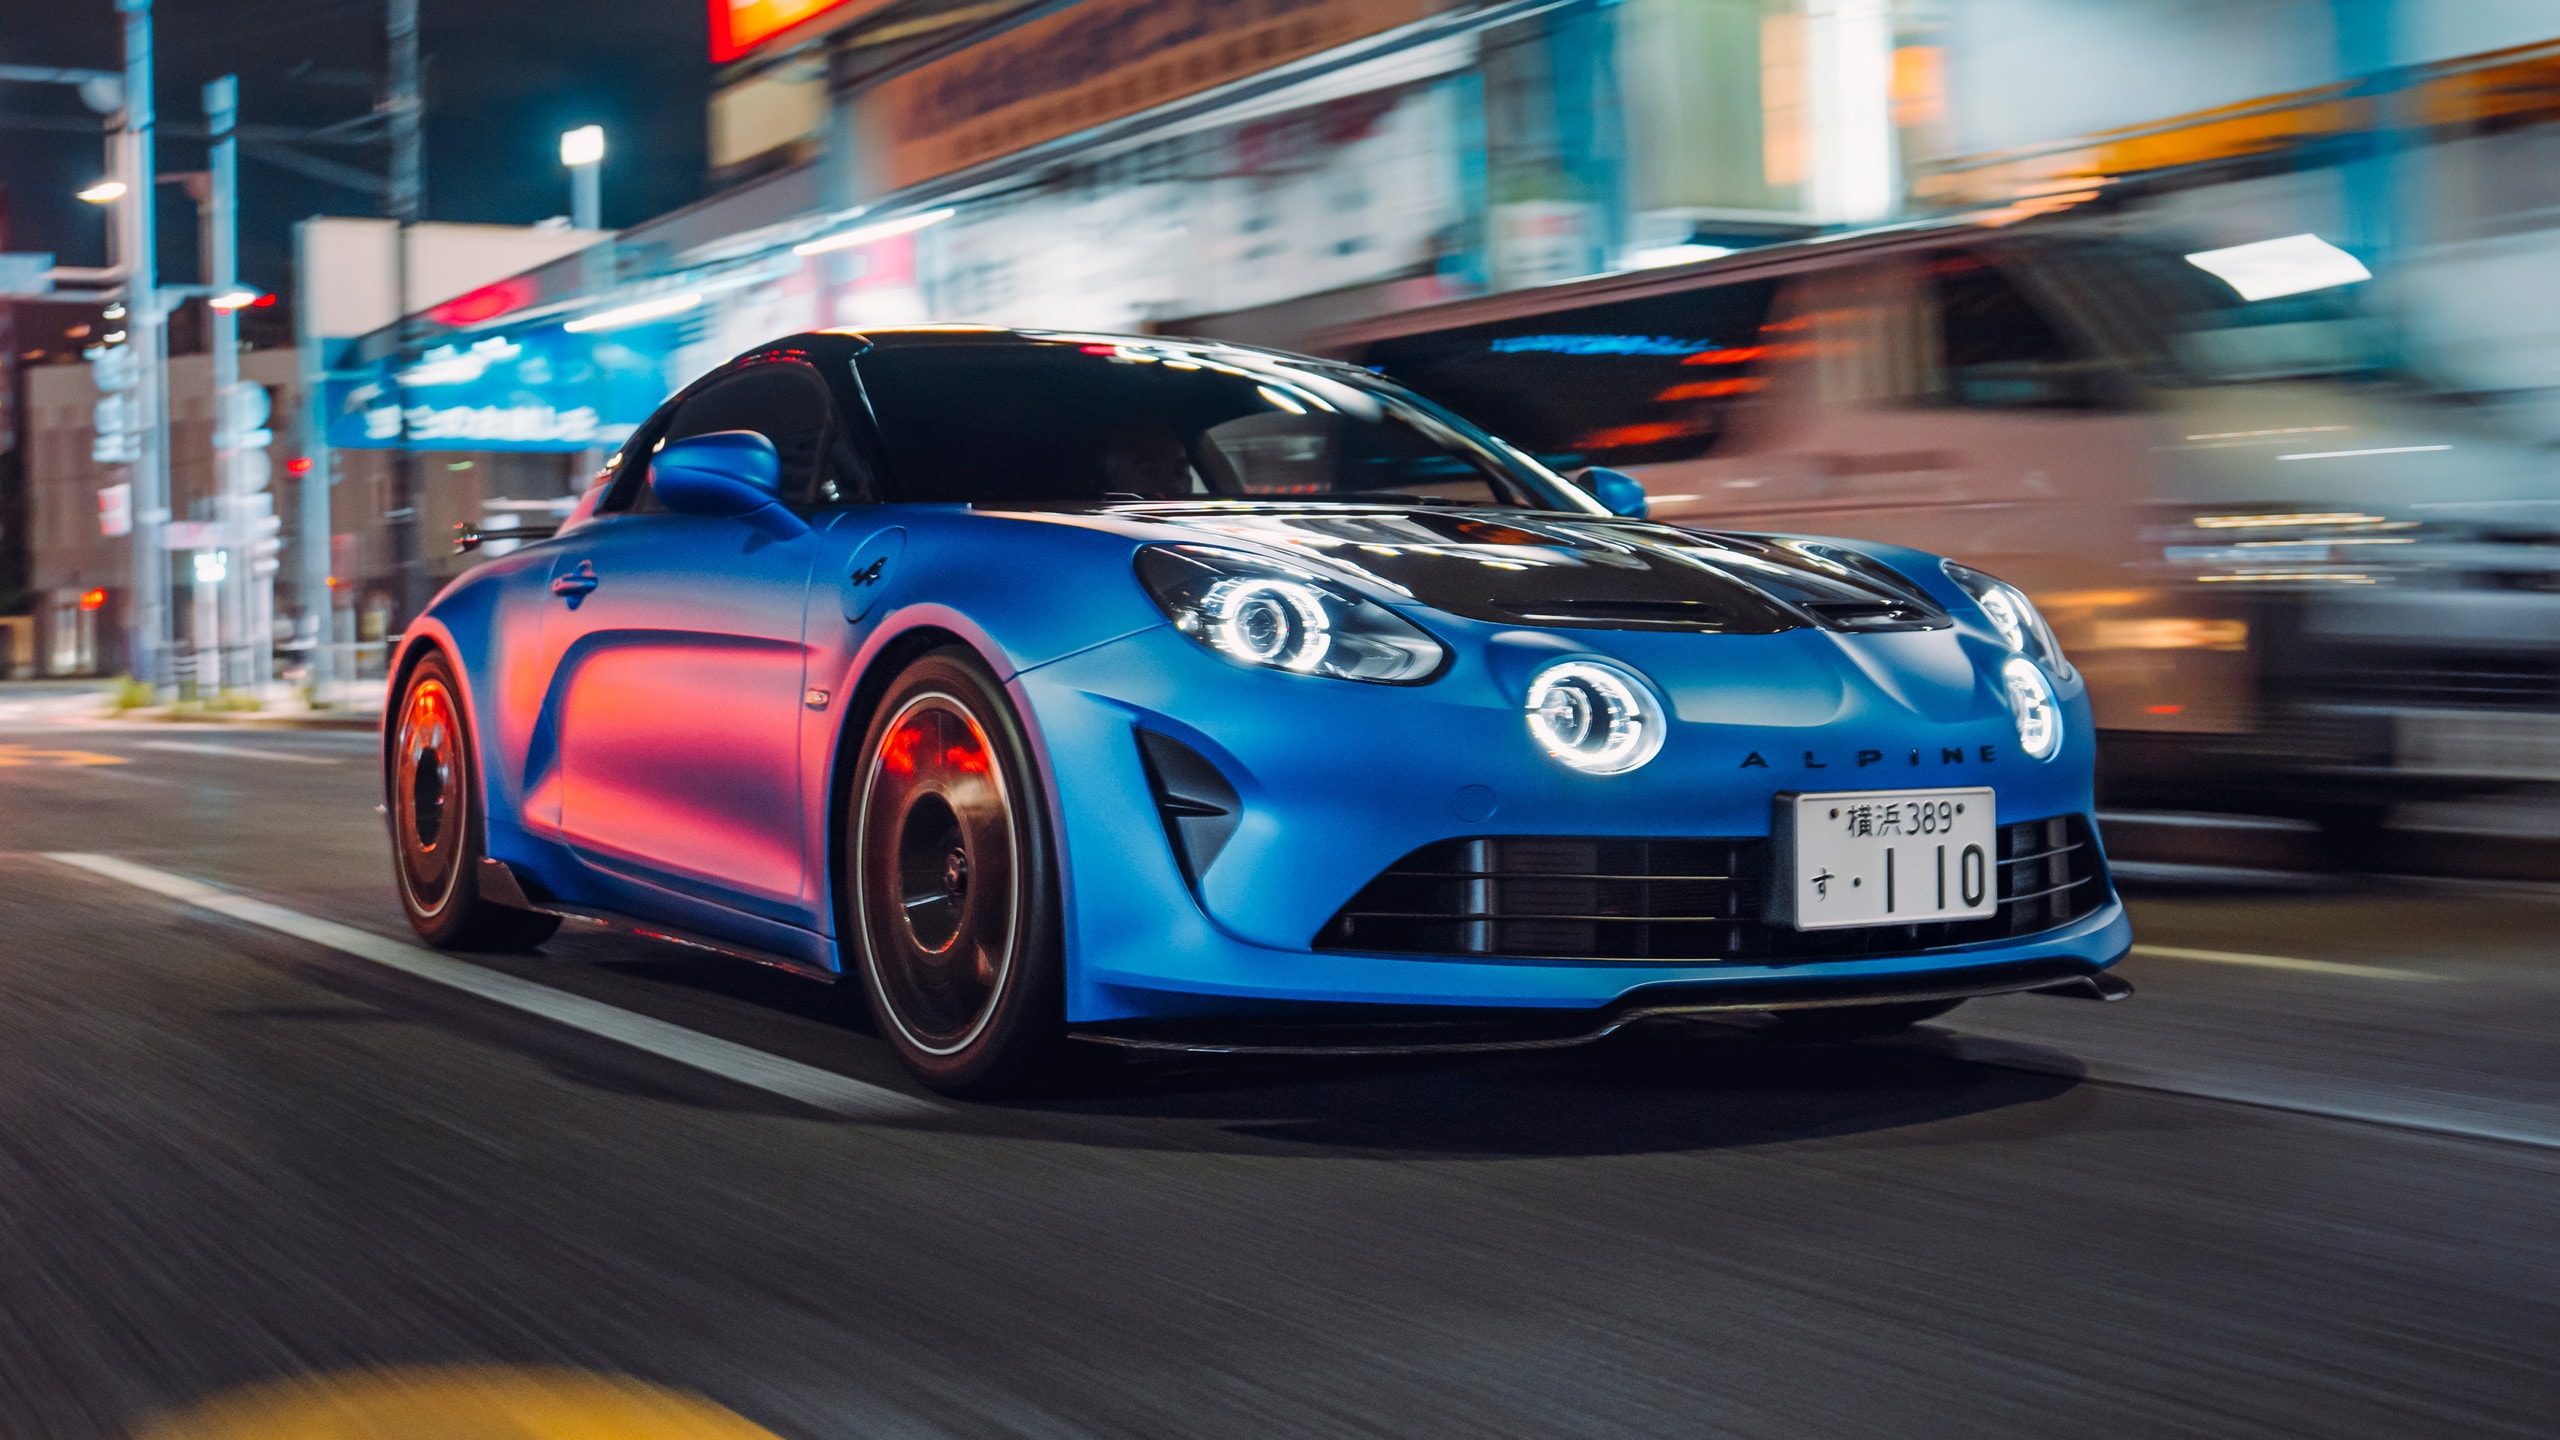 Alpine A110: The Complete Story